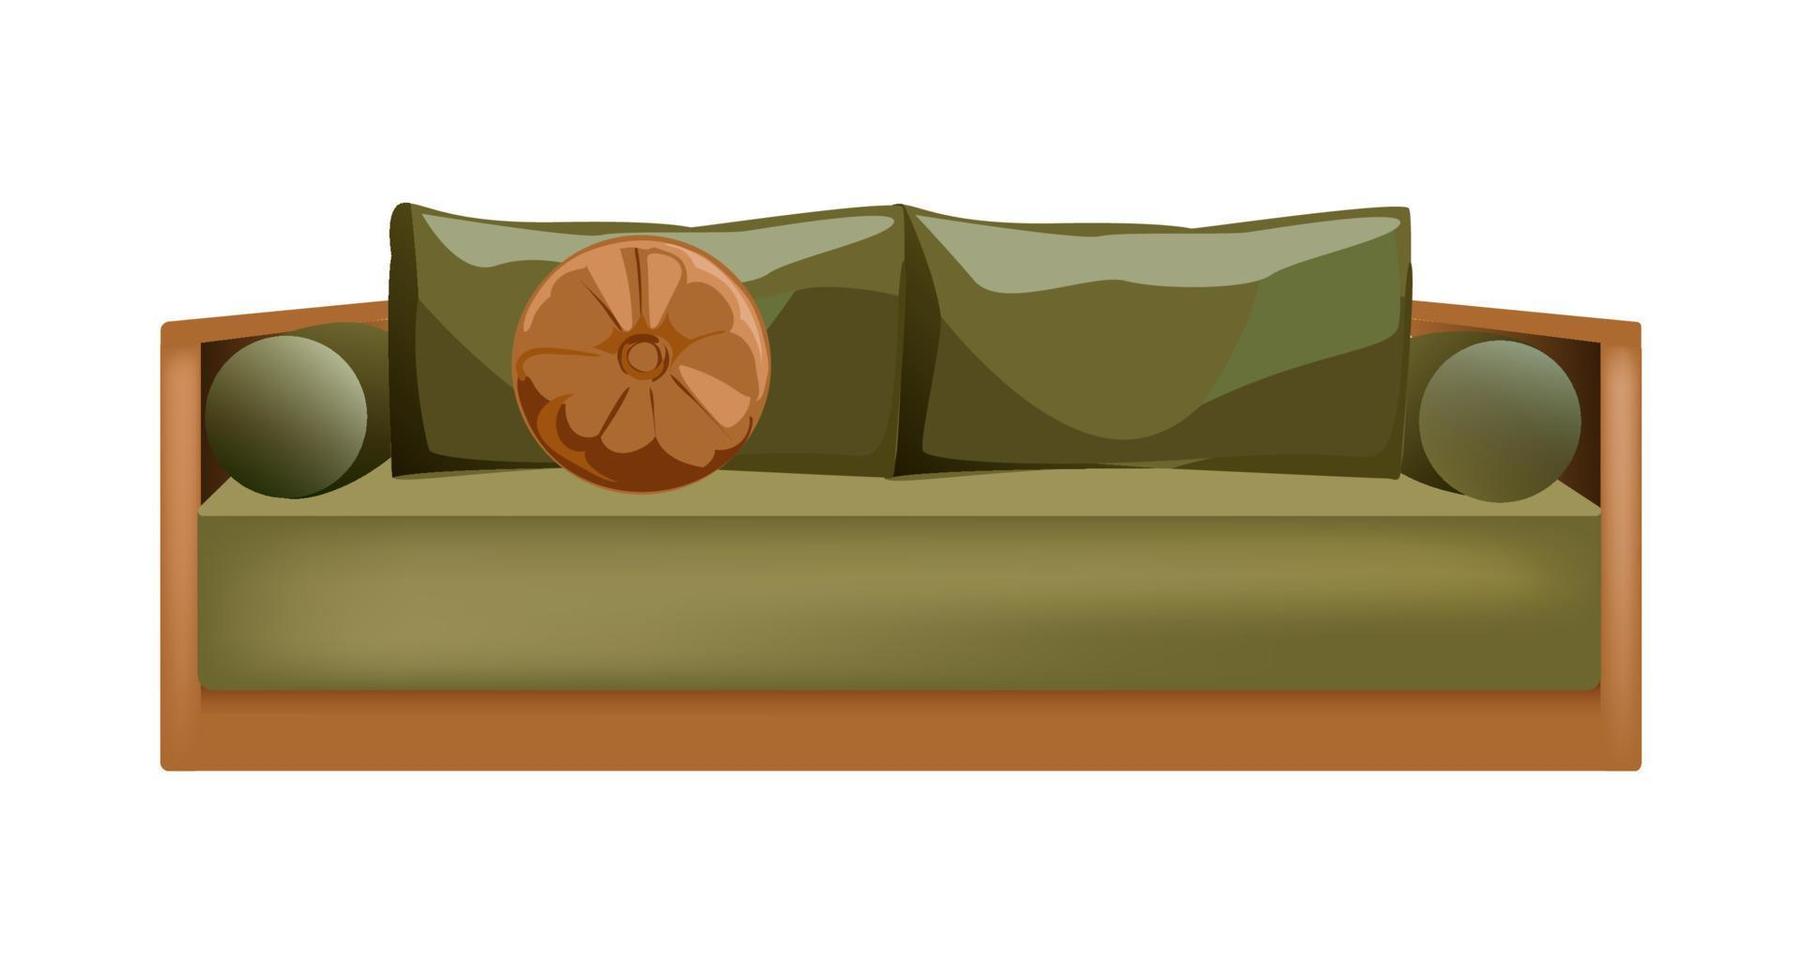 Green sofa vector flat illustration. Modern fabric couch with pillow and armrests isolated on white background.